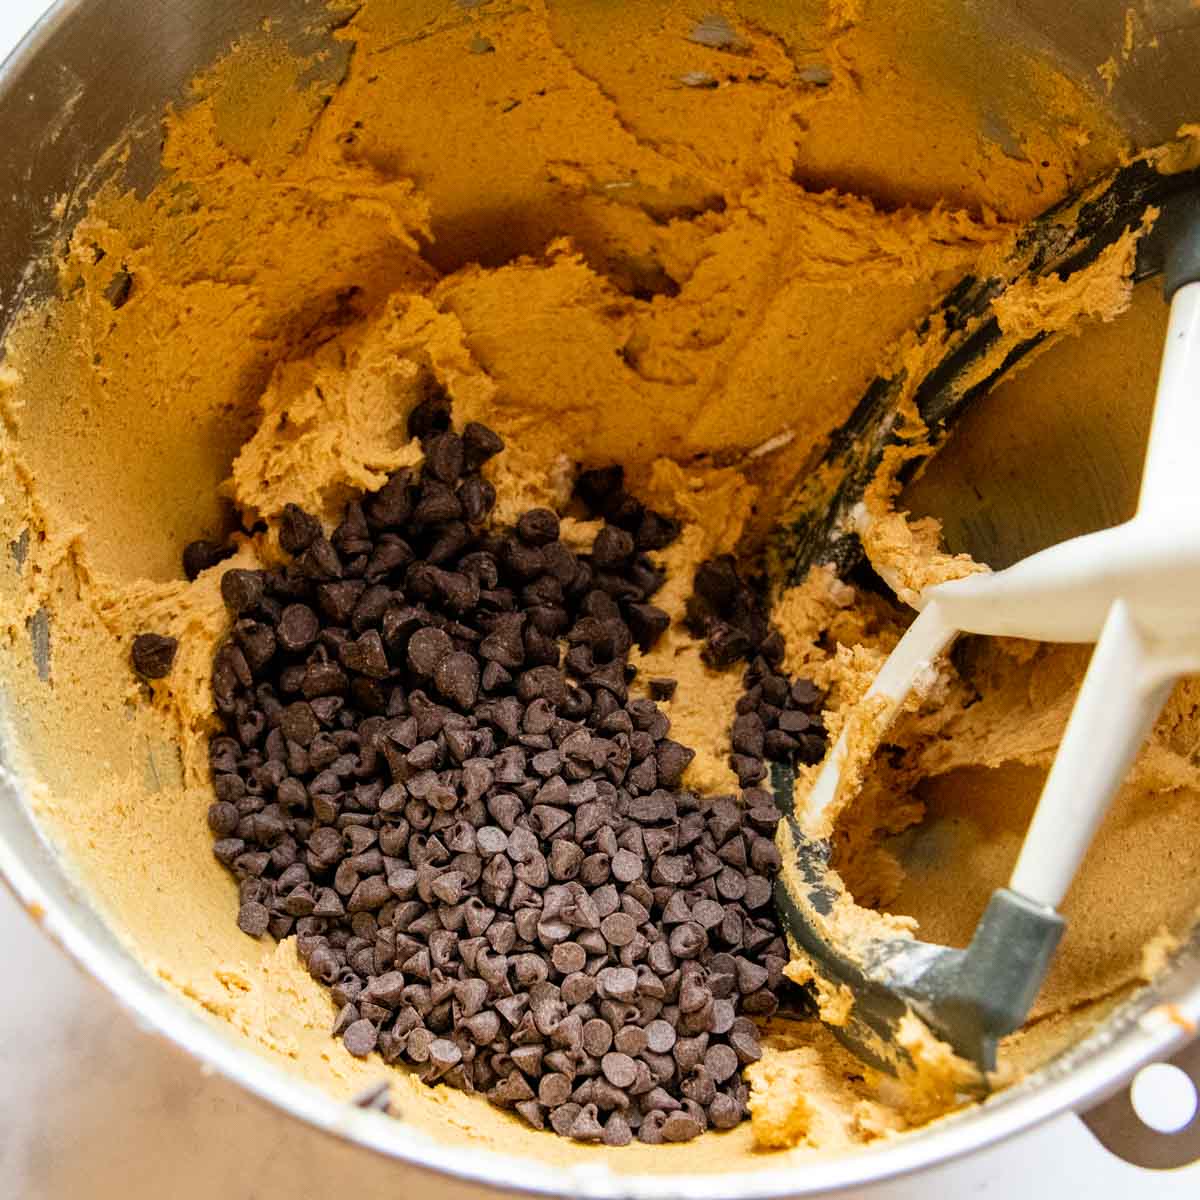 chocolate chips being added to the cookie dough.